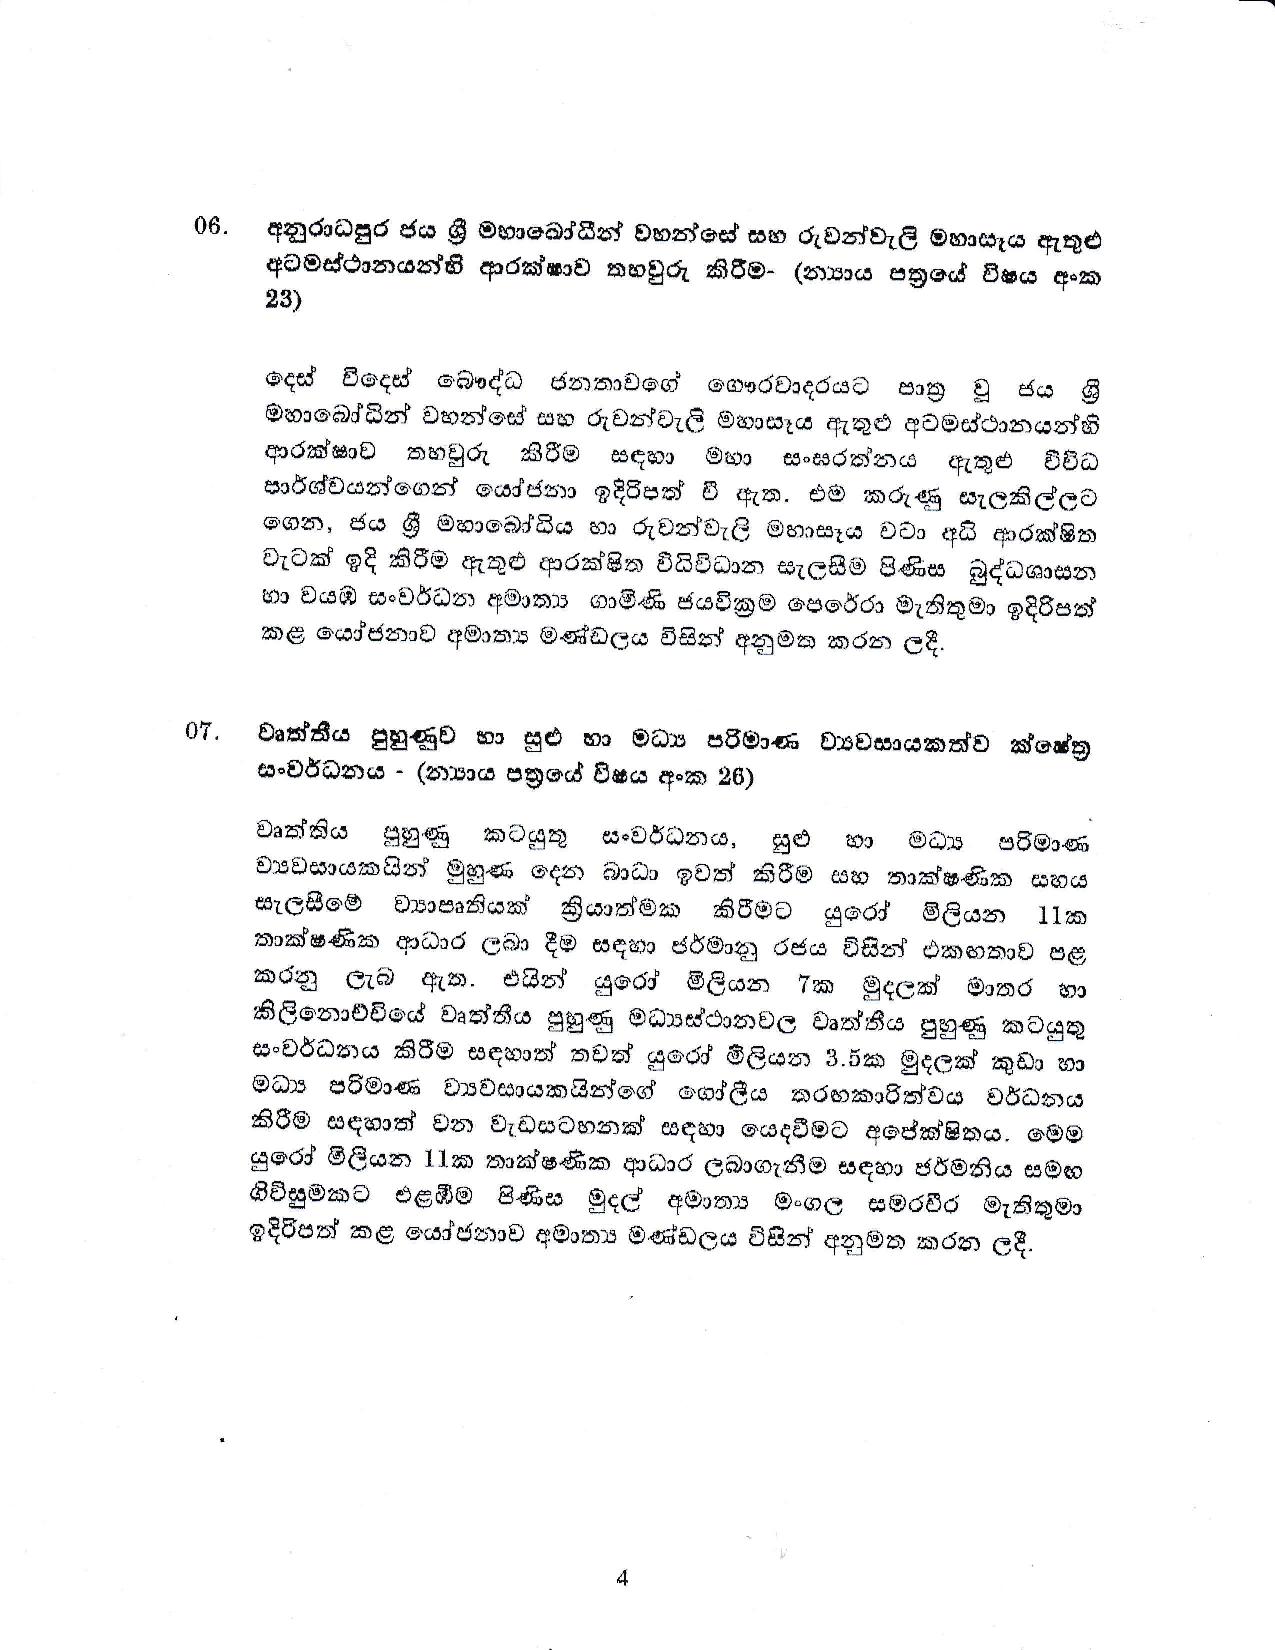 Cabinet Decision on 28.05.2019 page 004